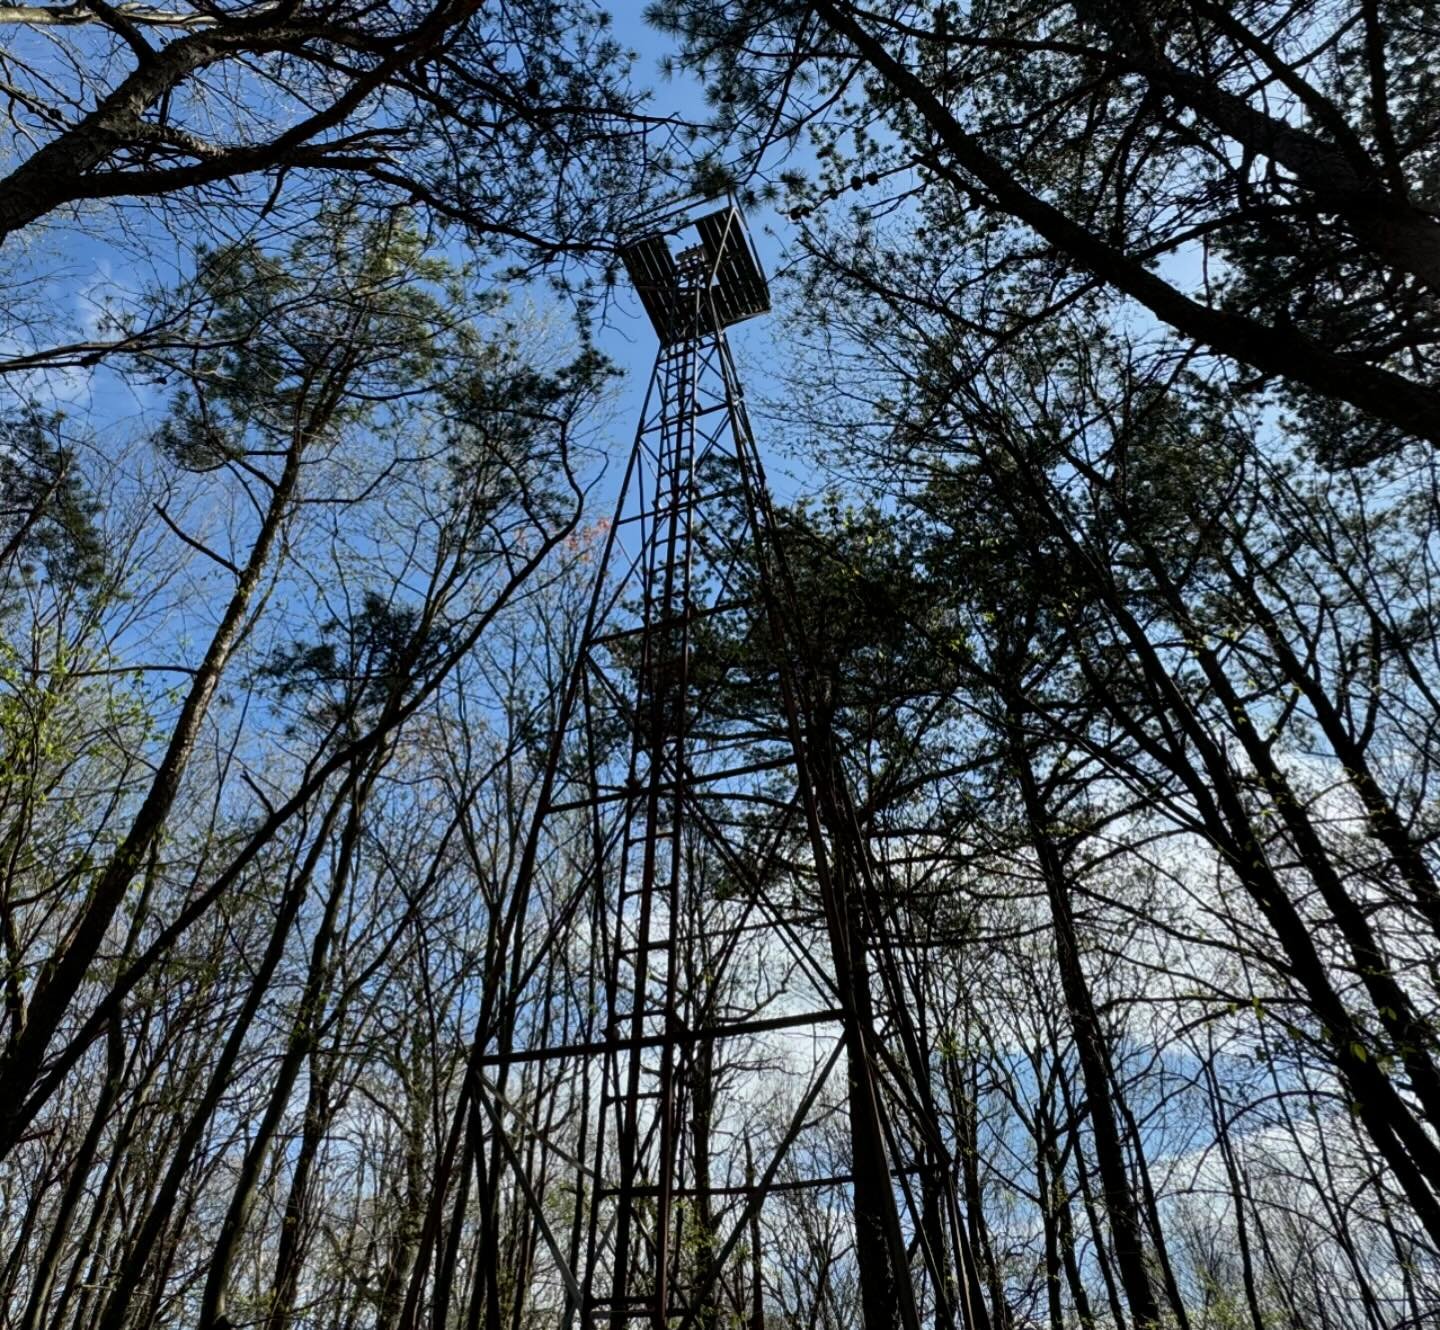 My gut told me I probably ought to be satisfied with standing on the highest ground of Berkeley County in West Virginia and not to mess with this rickety old tower swaying in the wind. I usually listen to my gut. The wood planks up there are definite